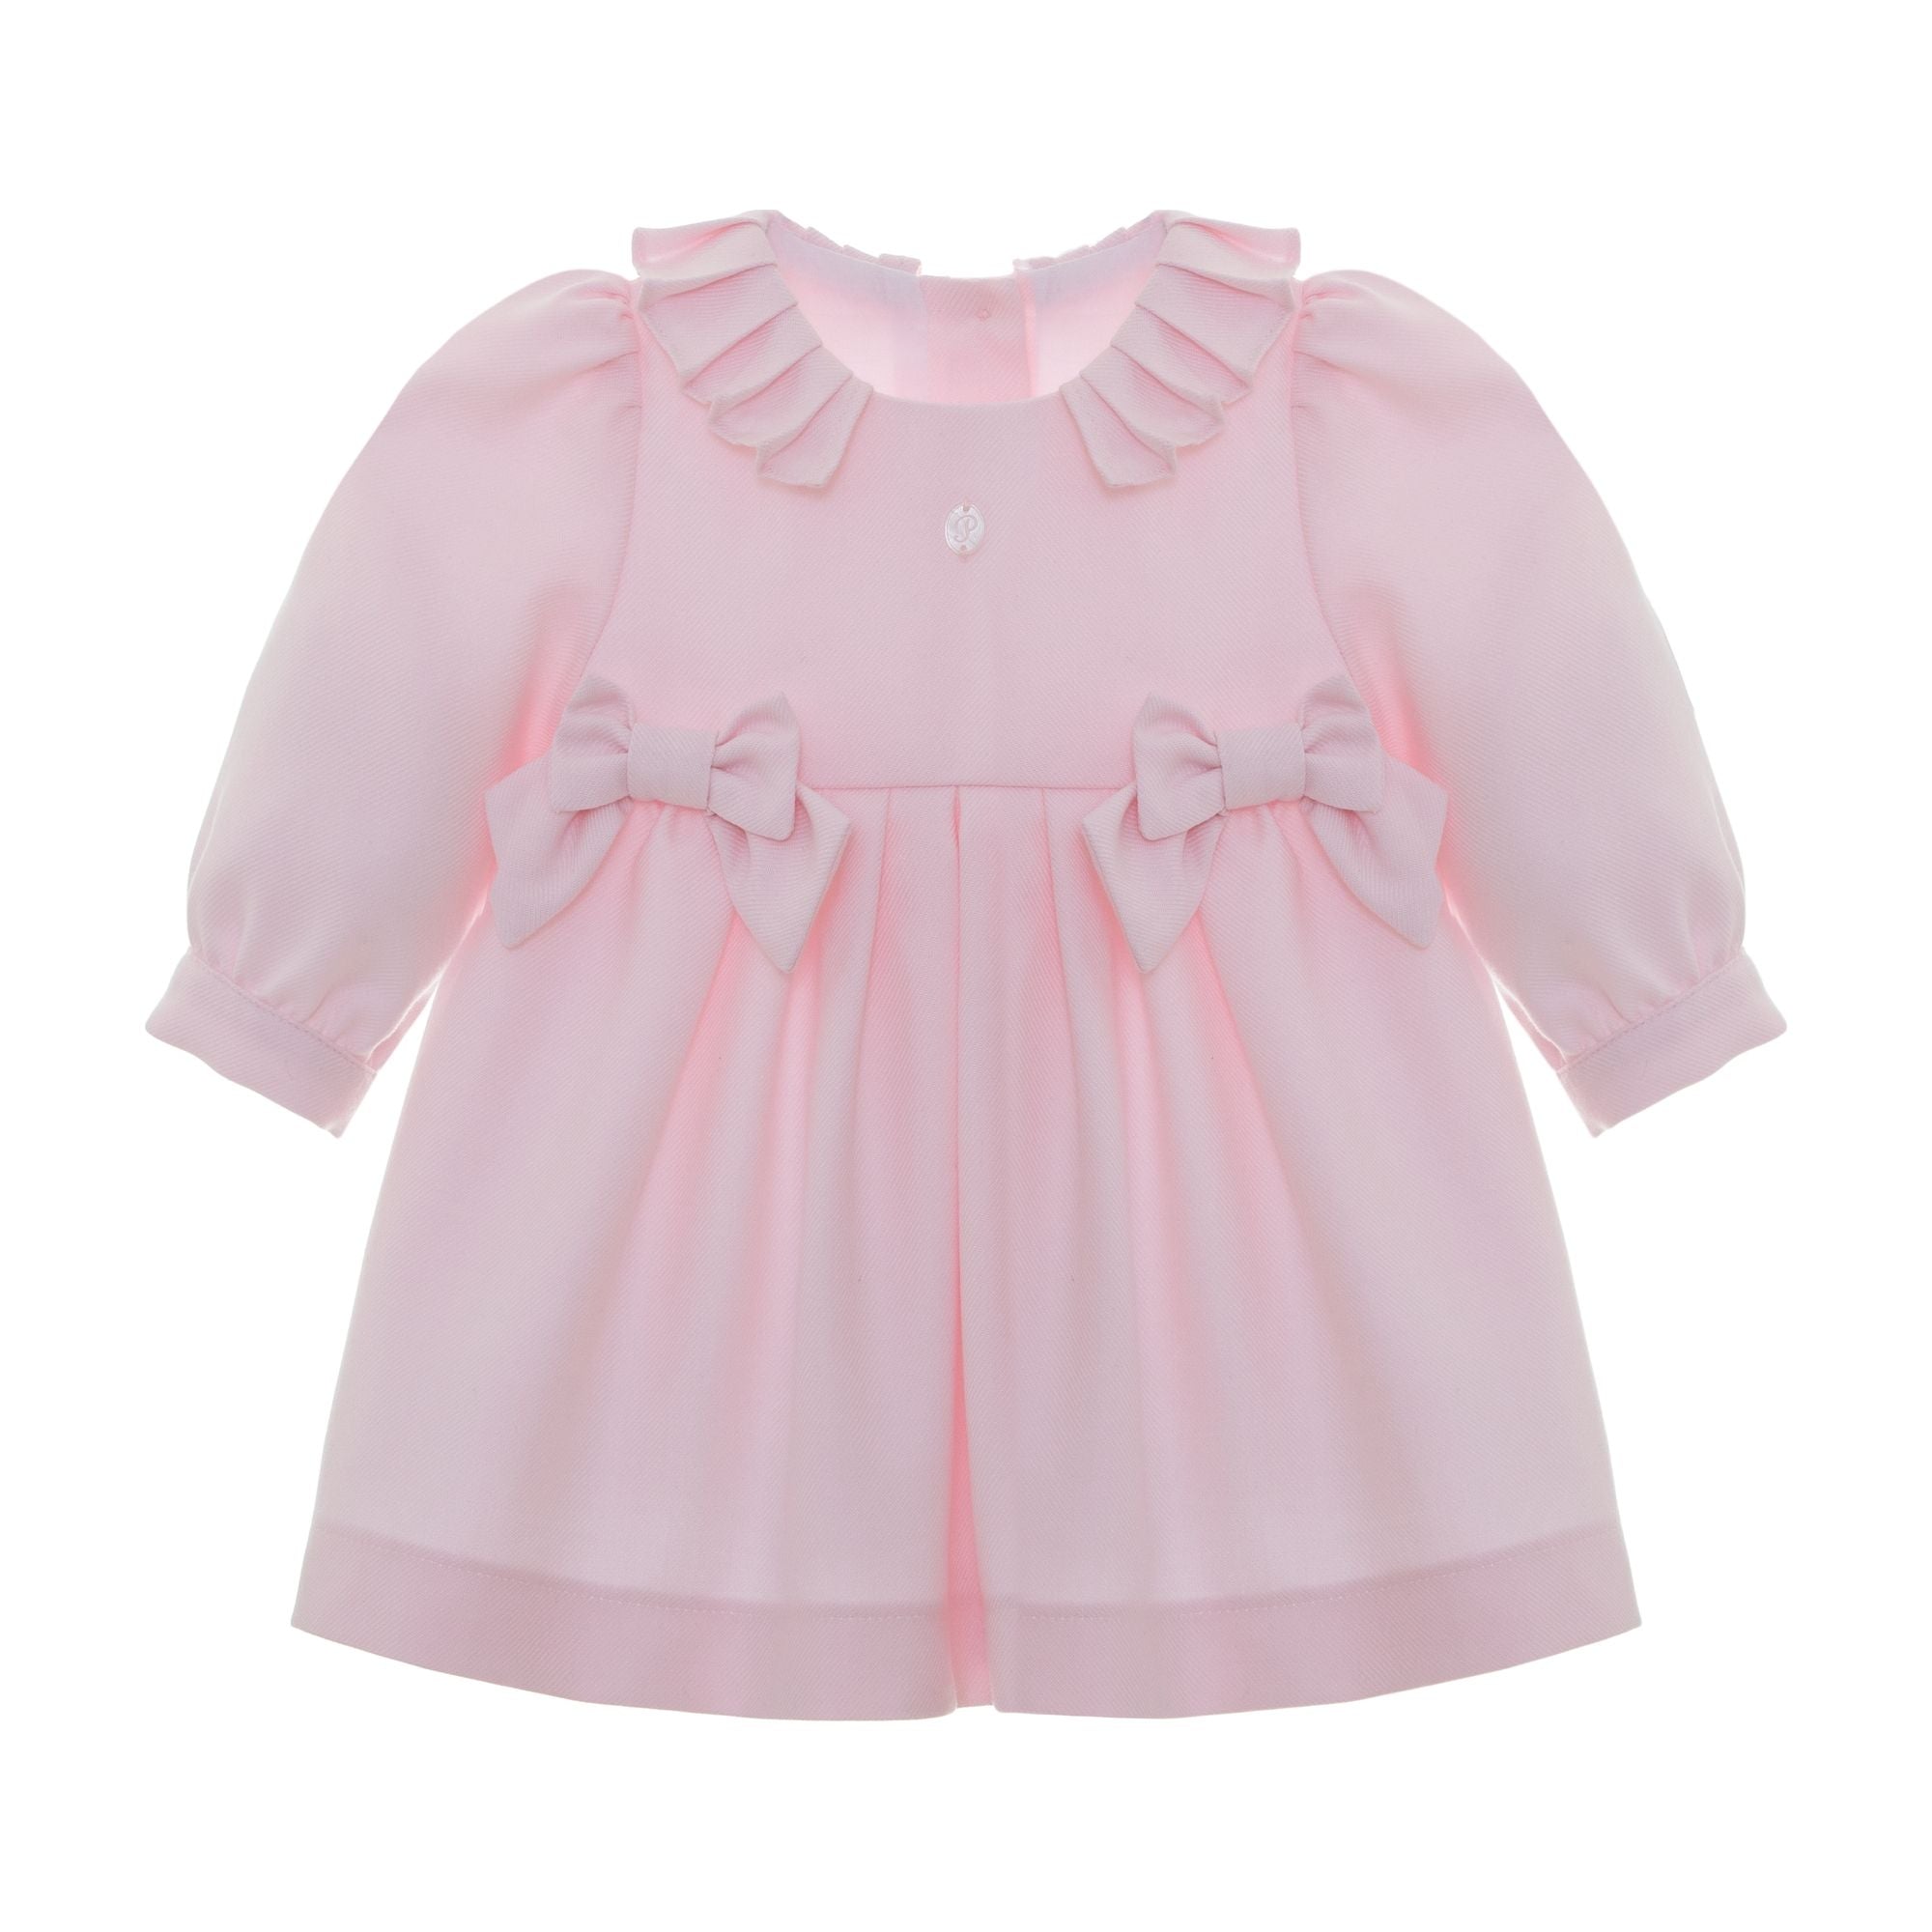 Patachou baby girl pink ruffle dress with bow accents on the front